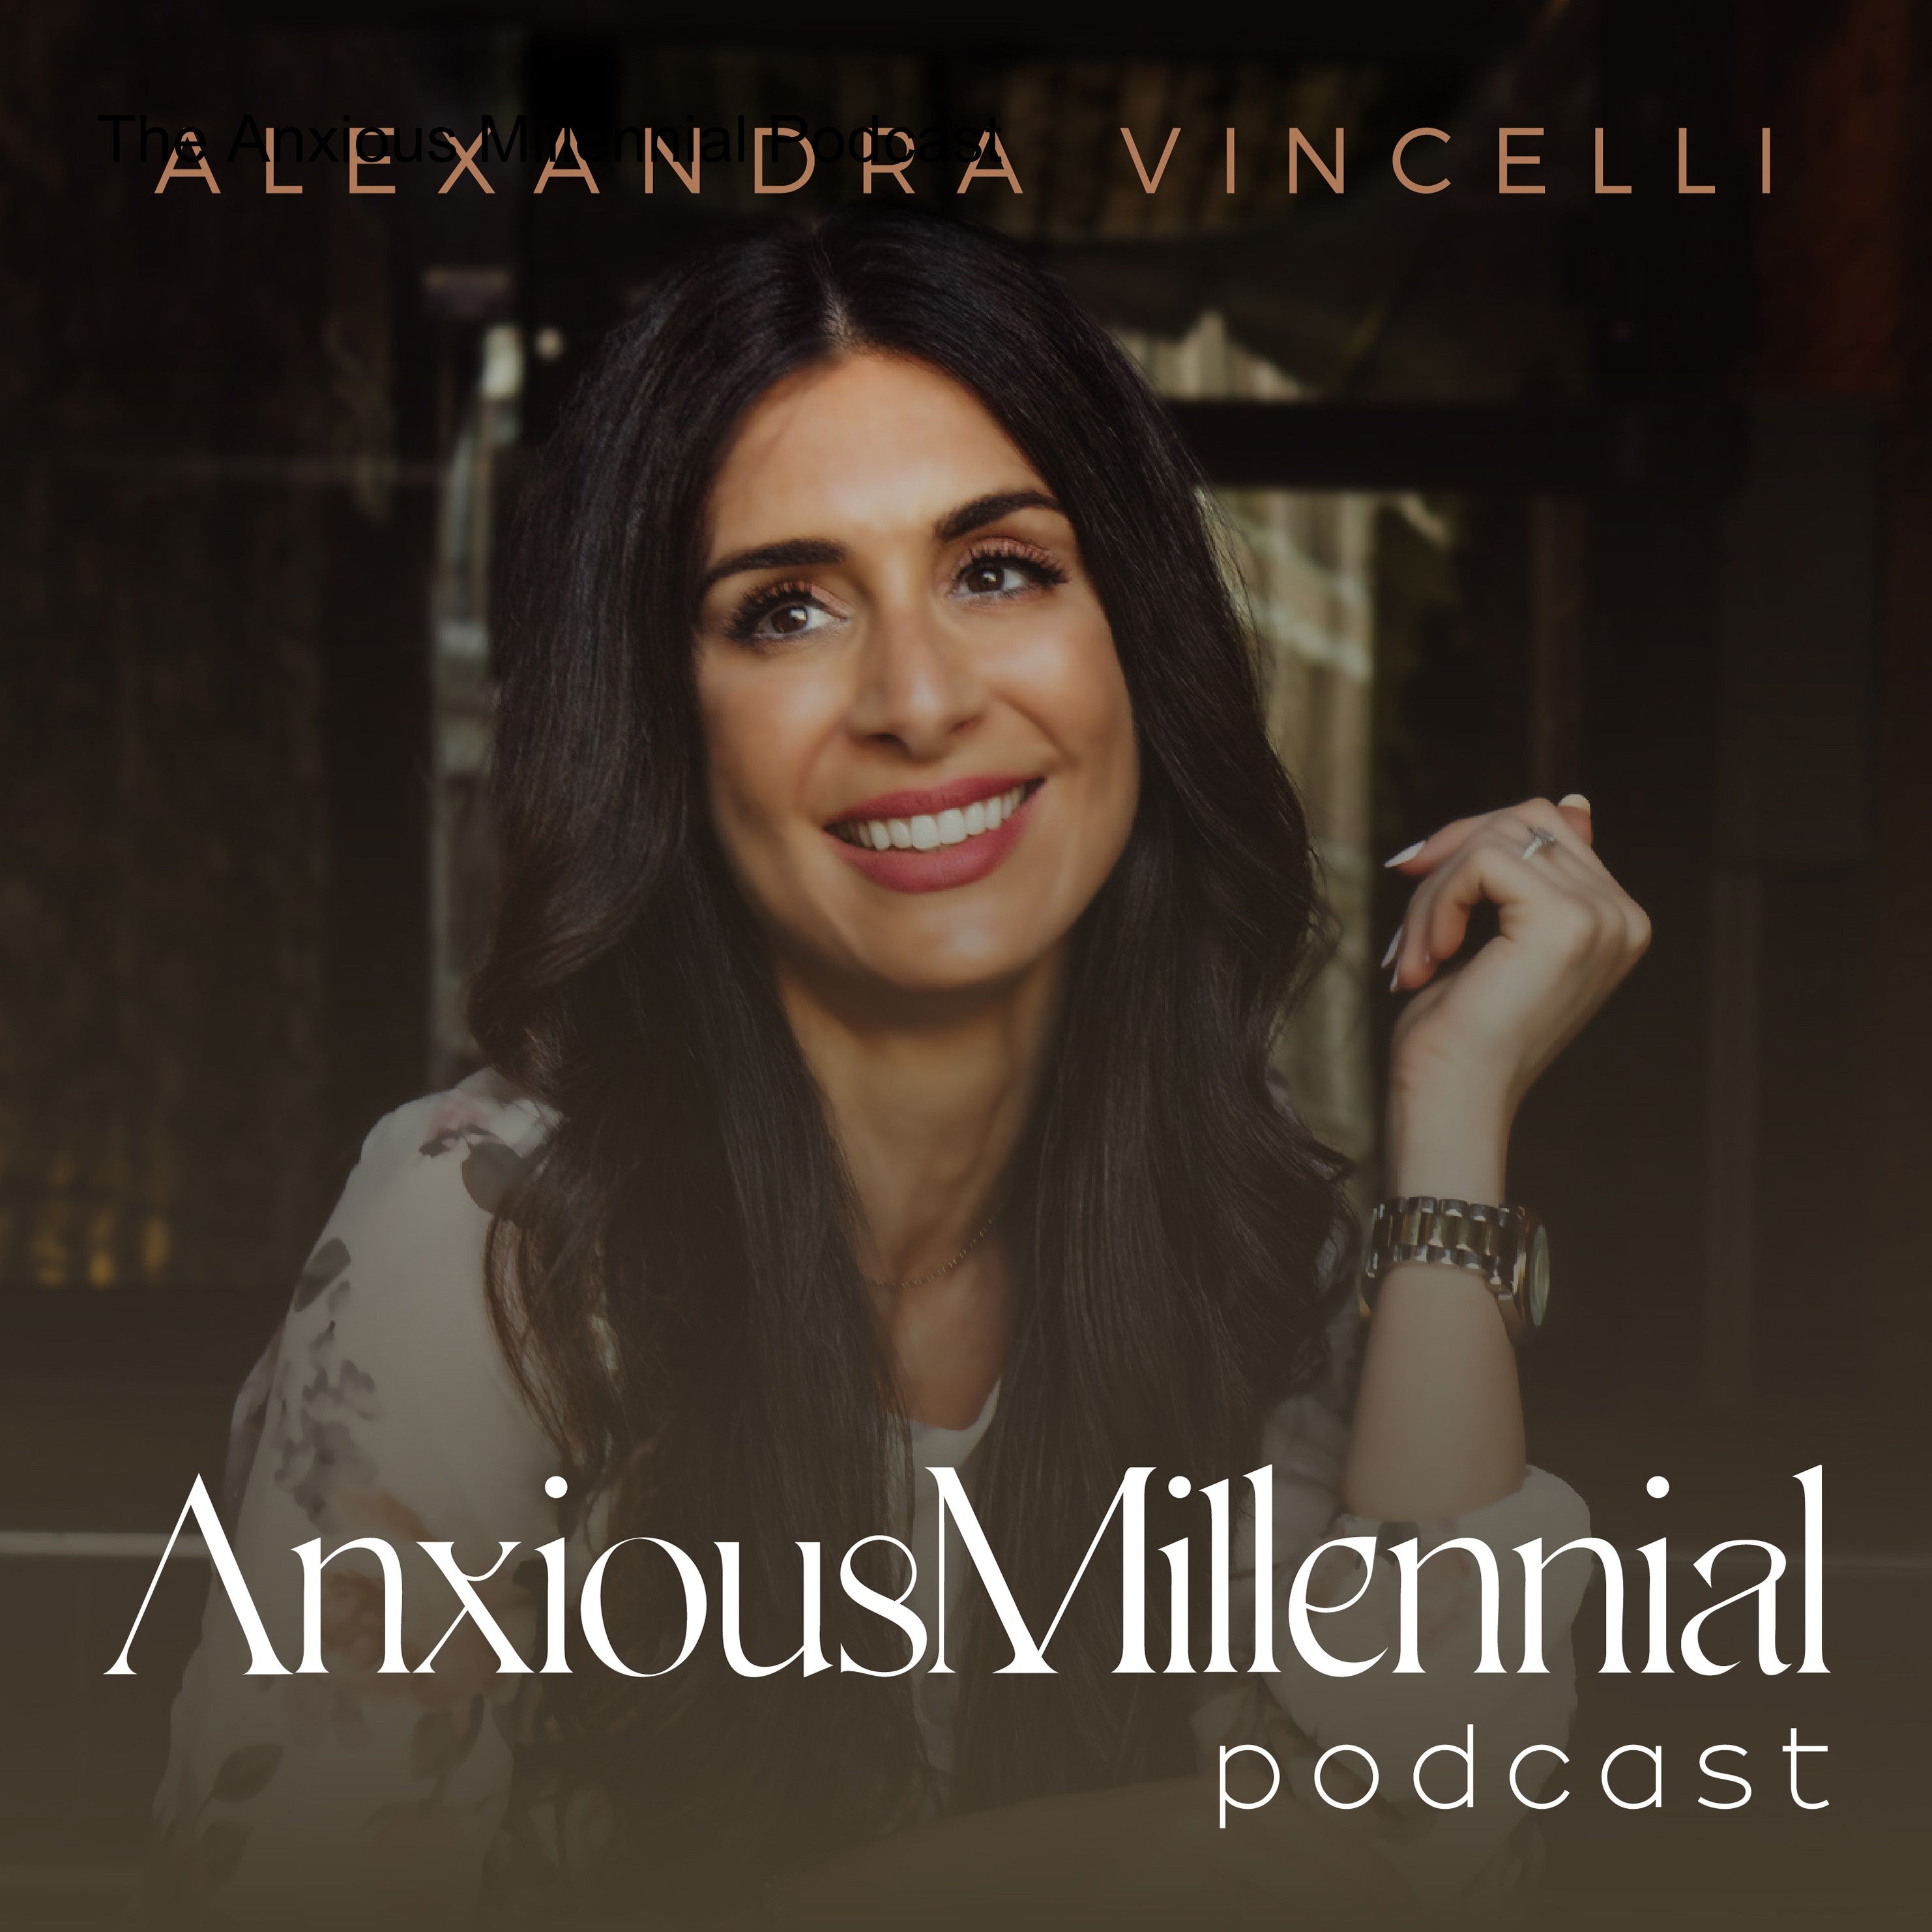 [The Anxious Millennial Podcast] - Empowerment, Courage, and Breaking Taboos, With Lara Emond